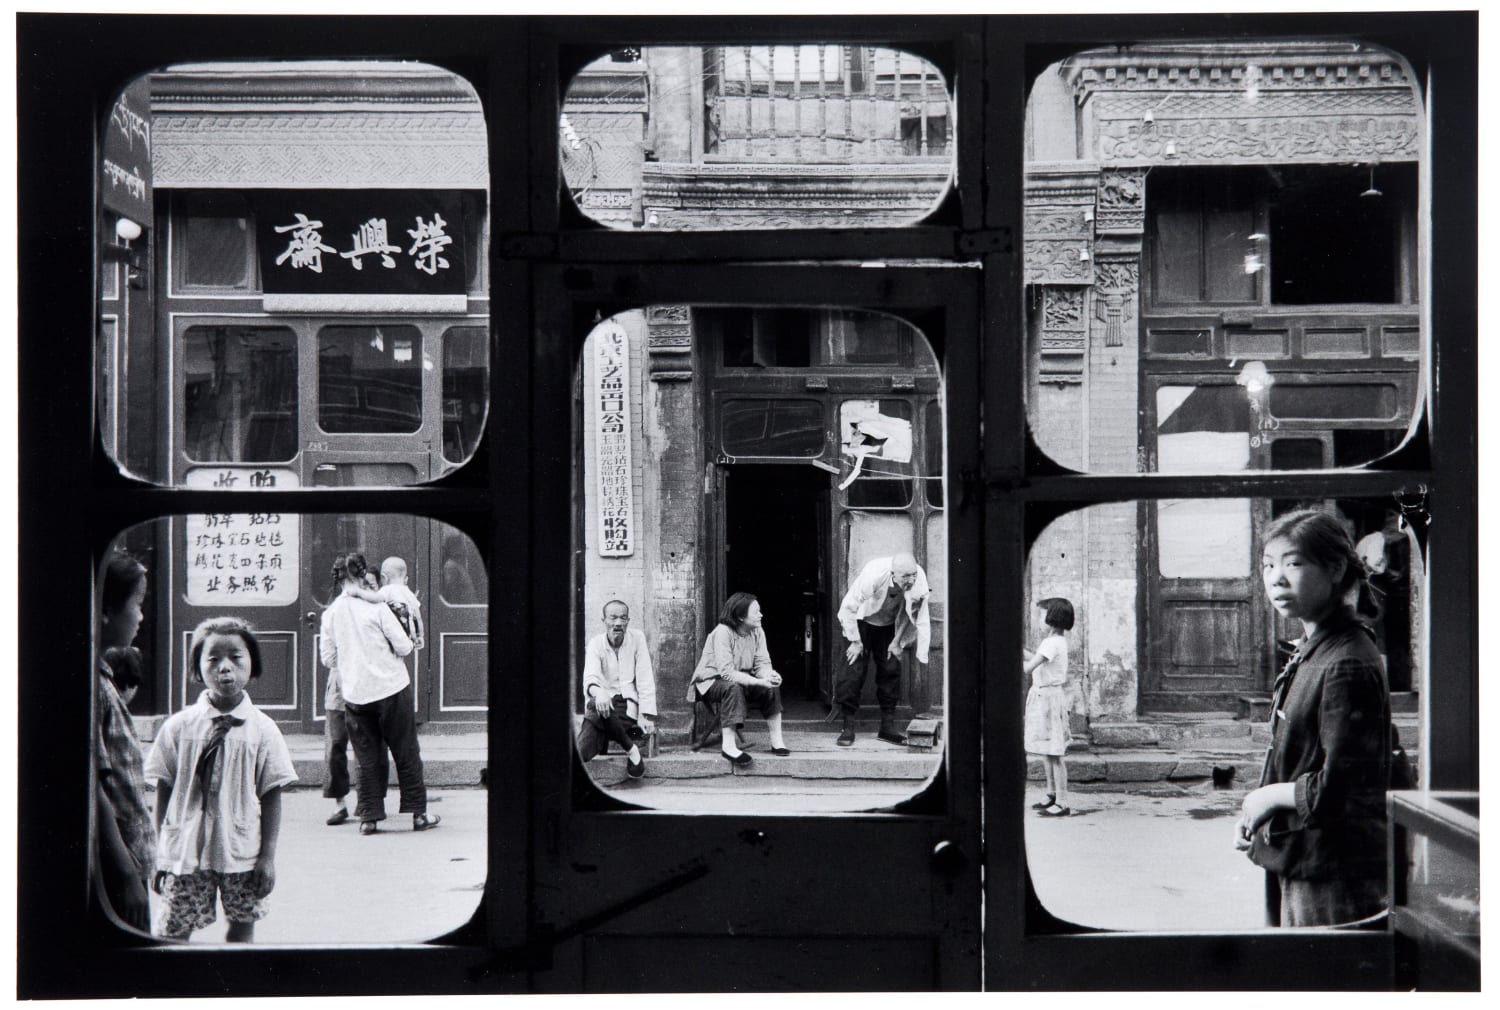 "Beijing" [1965] by Marc Riboud